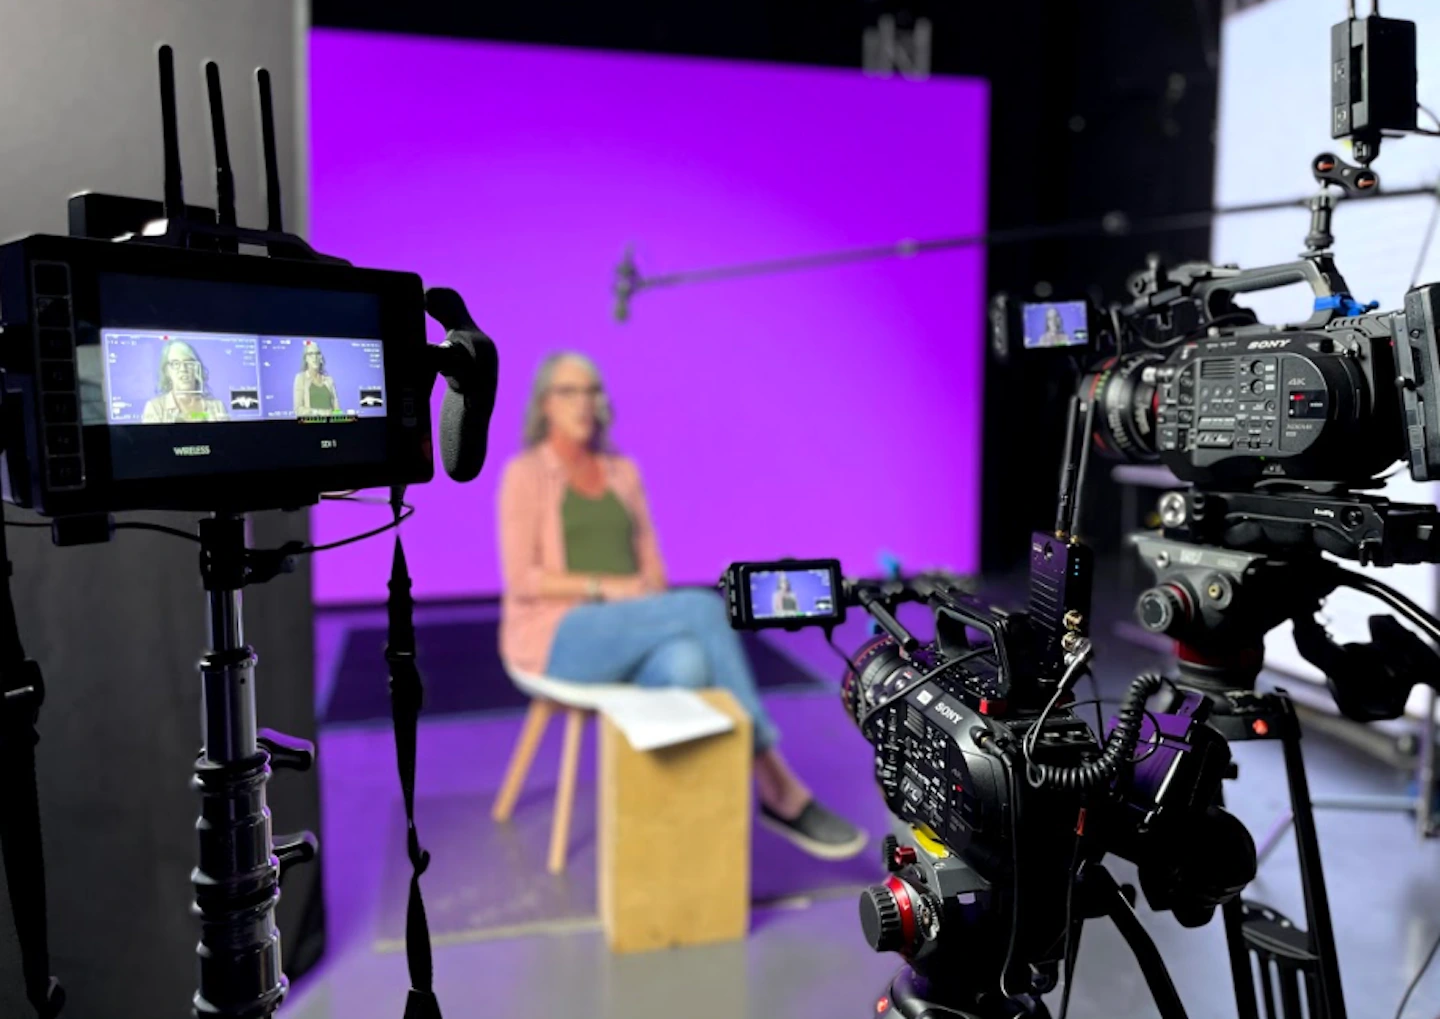 Behind the scenes of brand storytelling video production.